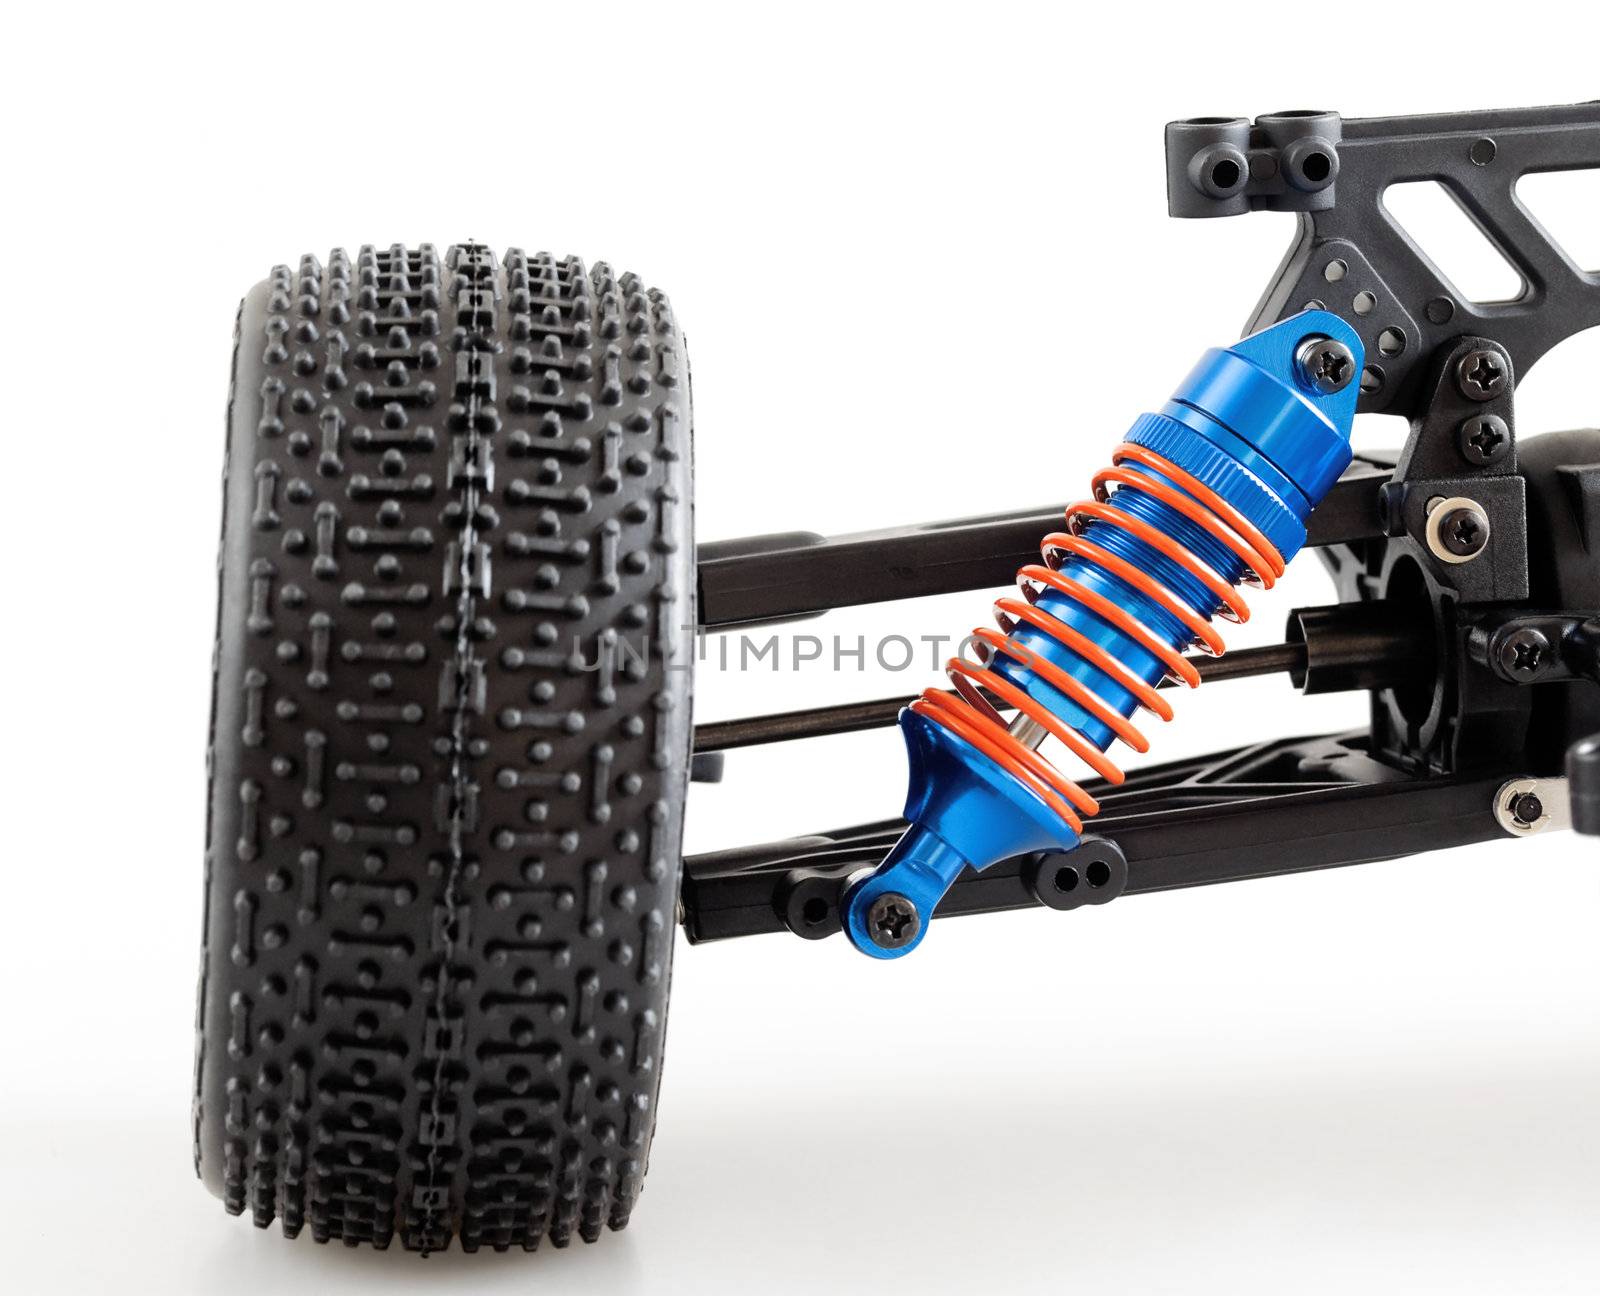 suspension of modern radio controlled car for competitions on white background